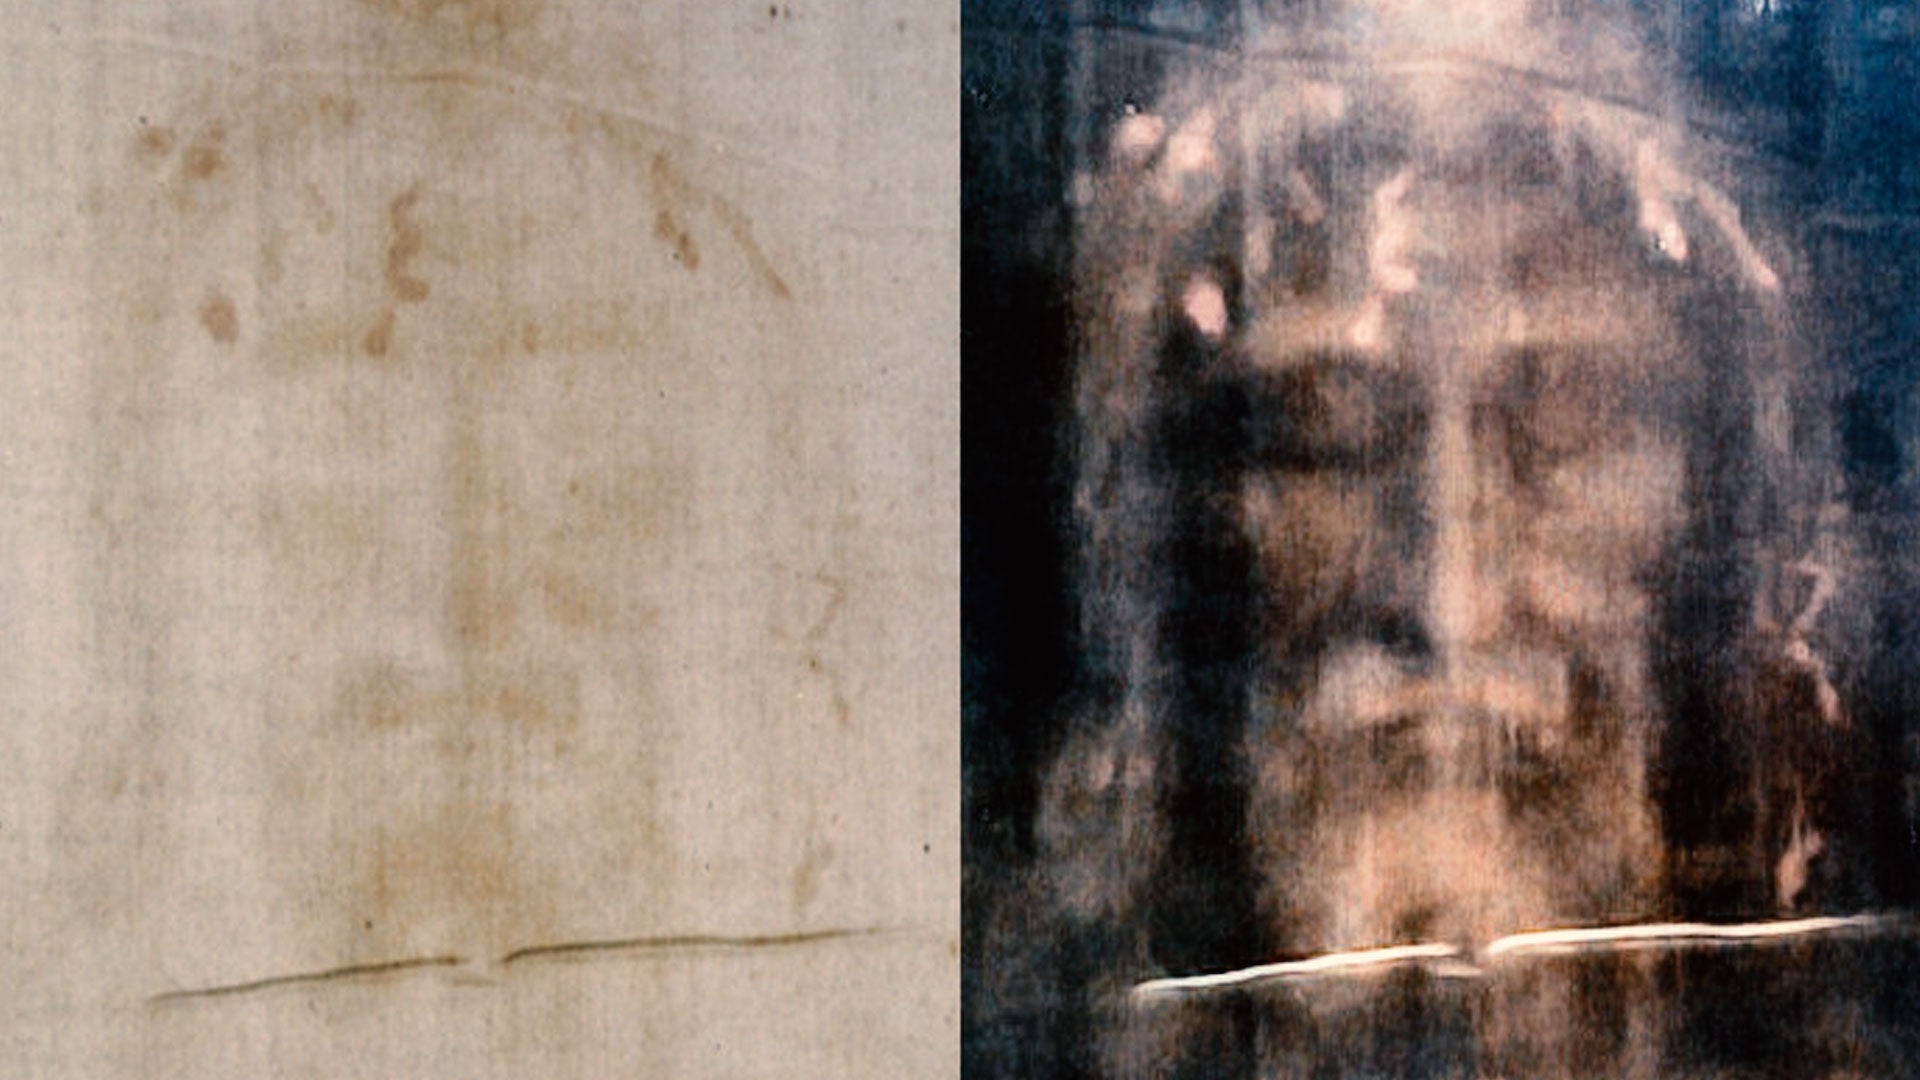 Blood Particles Show 'the Turin Shroud is Not Fake' CBN News